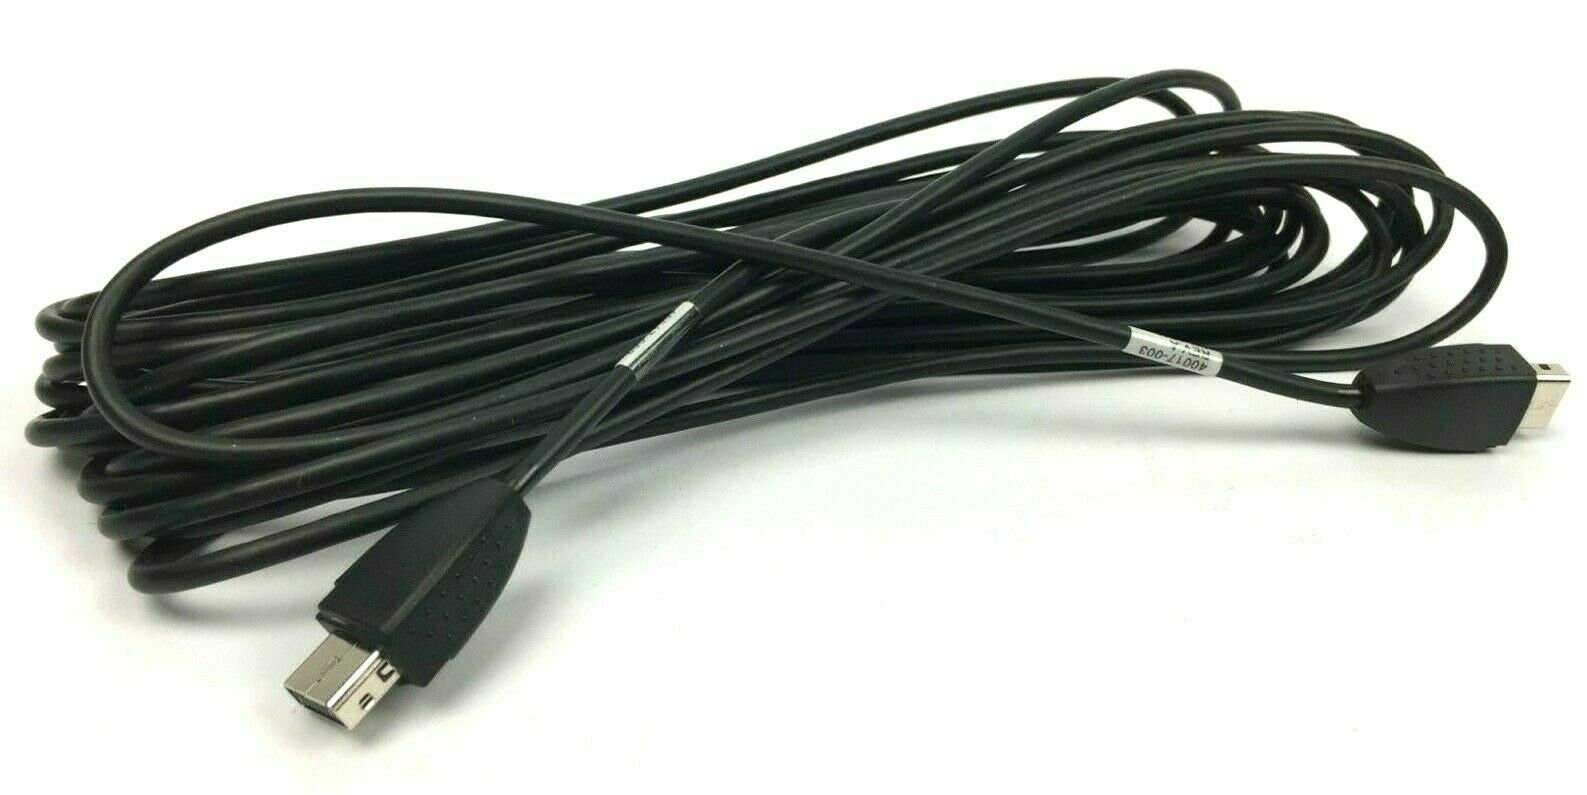 Polycom 14pin Microphone Video HD Cable REV A 25Ft for Polycom 2457-40017-003